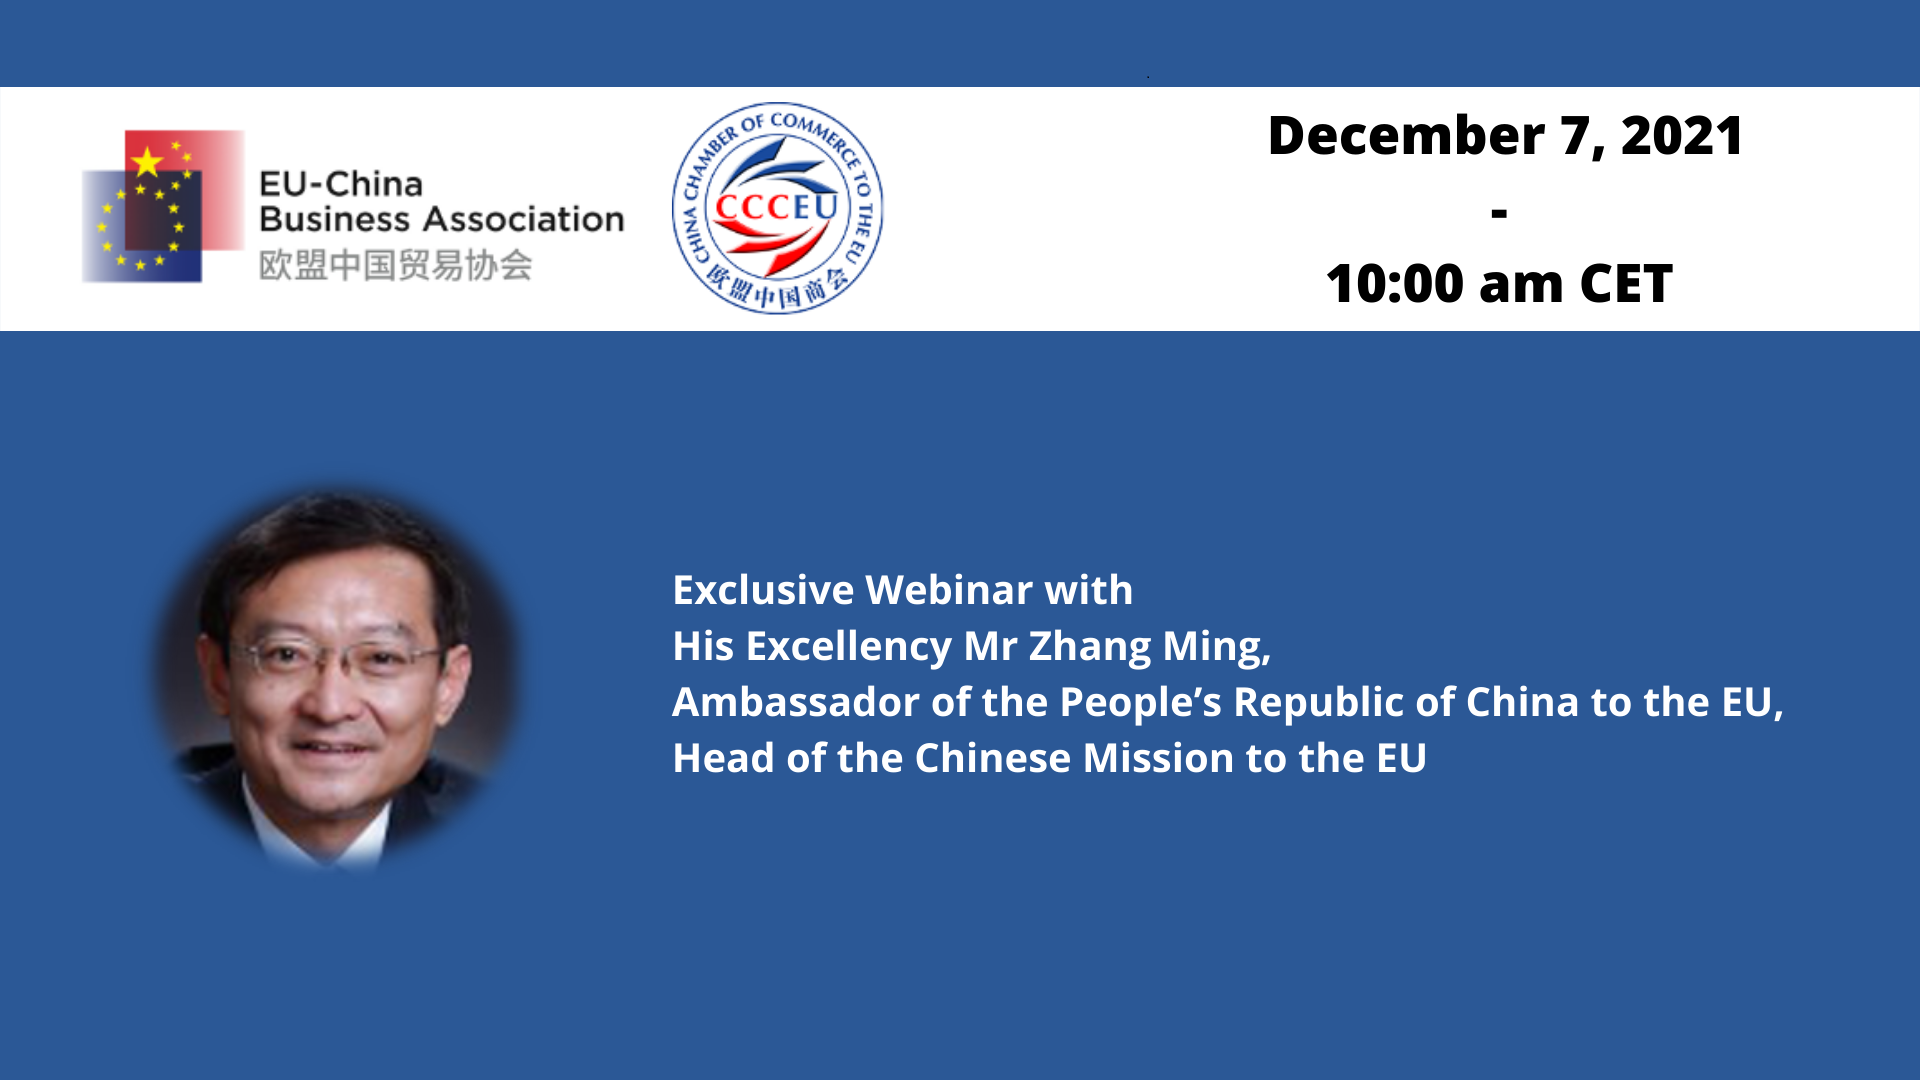 Exclusive webinar with His Excellency Mr Zhang Ming, Ambassador of the People’s Republic of China to the EU and Head of the Chinese Mission to the EU